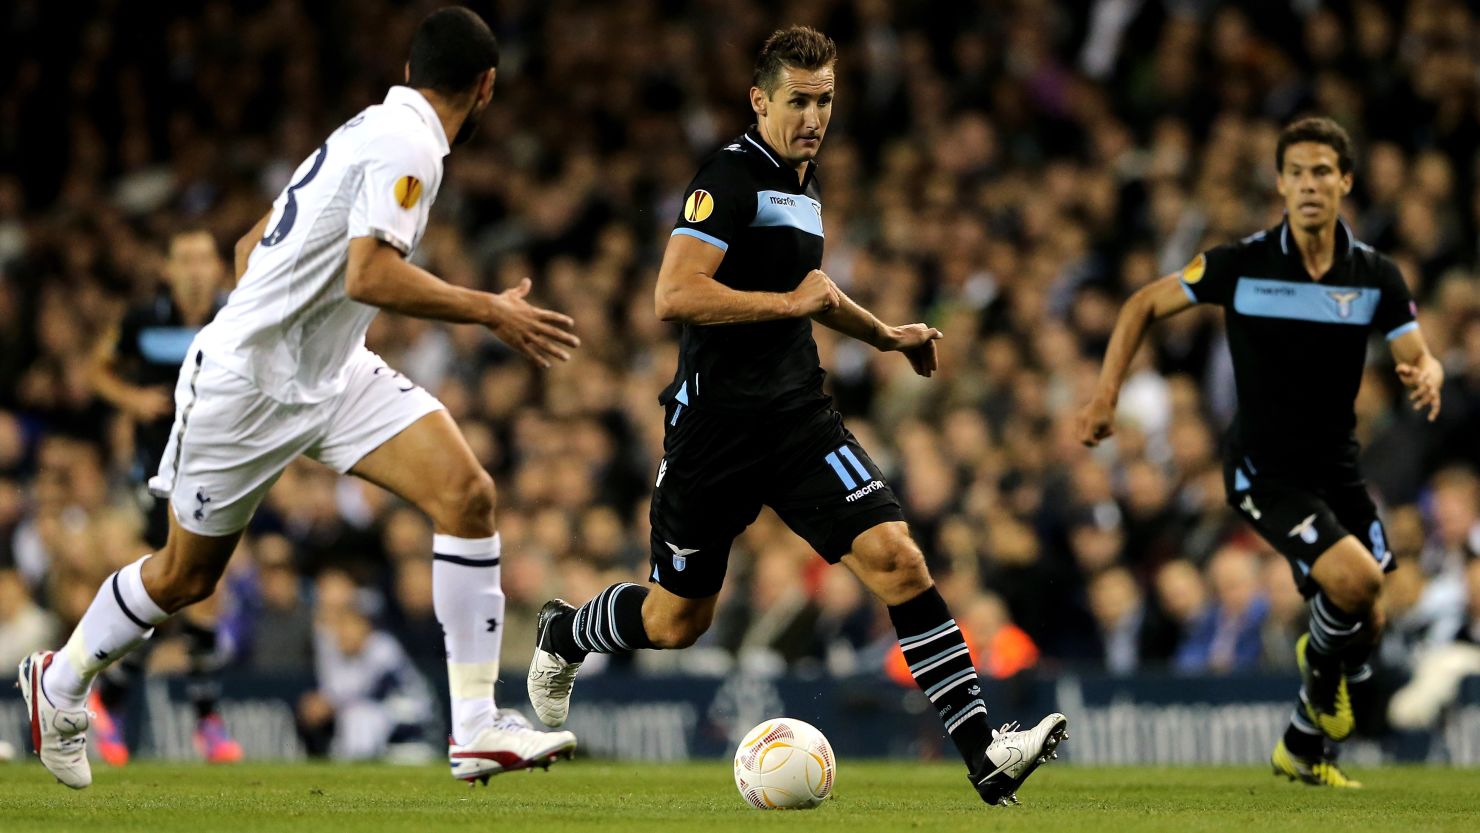 Lazio's Miroslav Klose was unable to break the deadlock at White Hart Lane as the teams finished goalless.